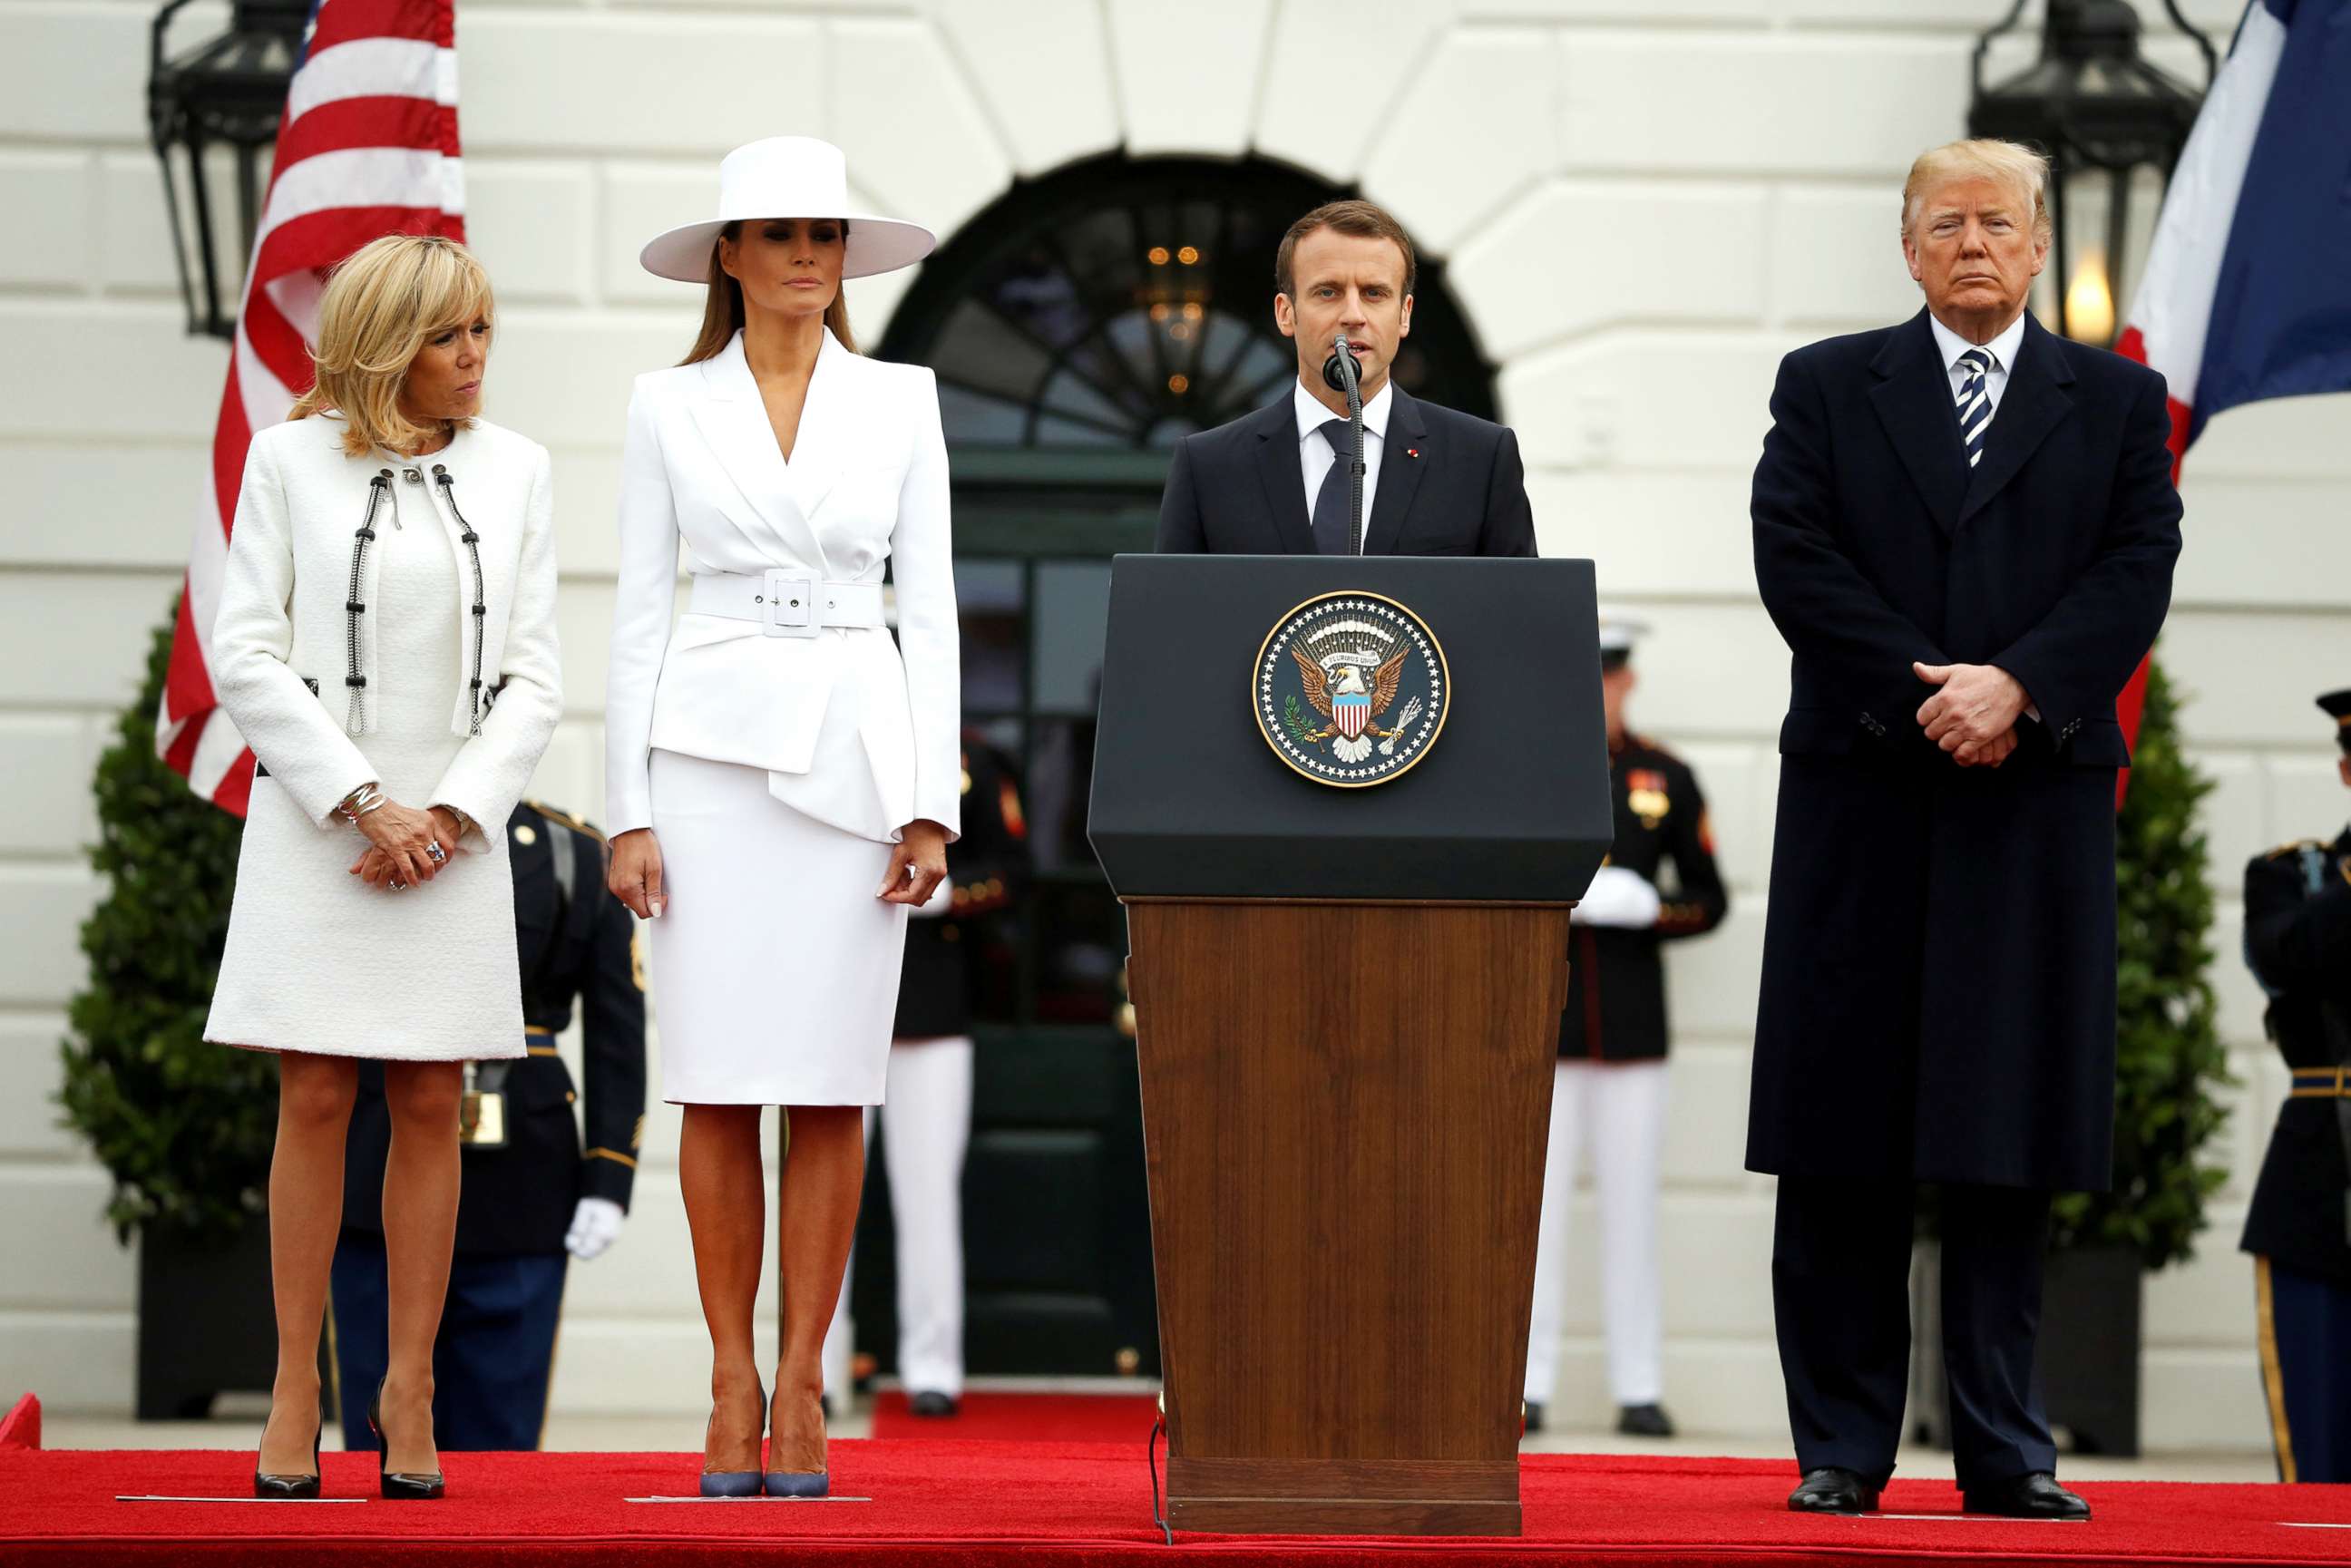 PHOTO: French President Emmanuel Macron speaks during an arrival ceremony at the White House, April 24, 2018. 